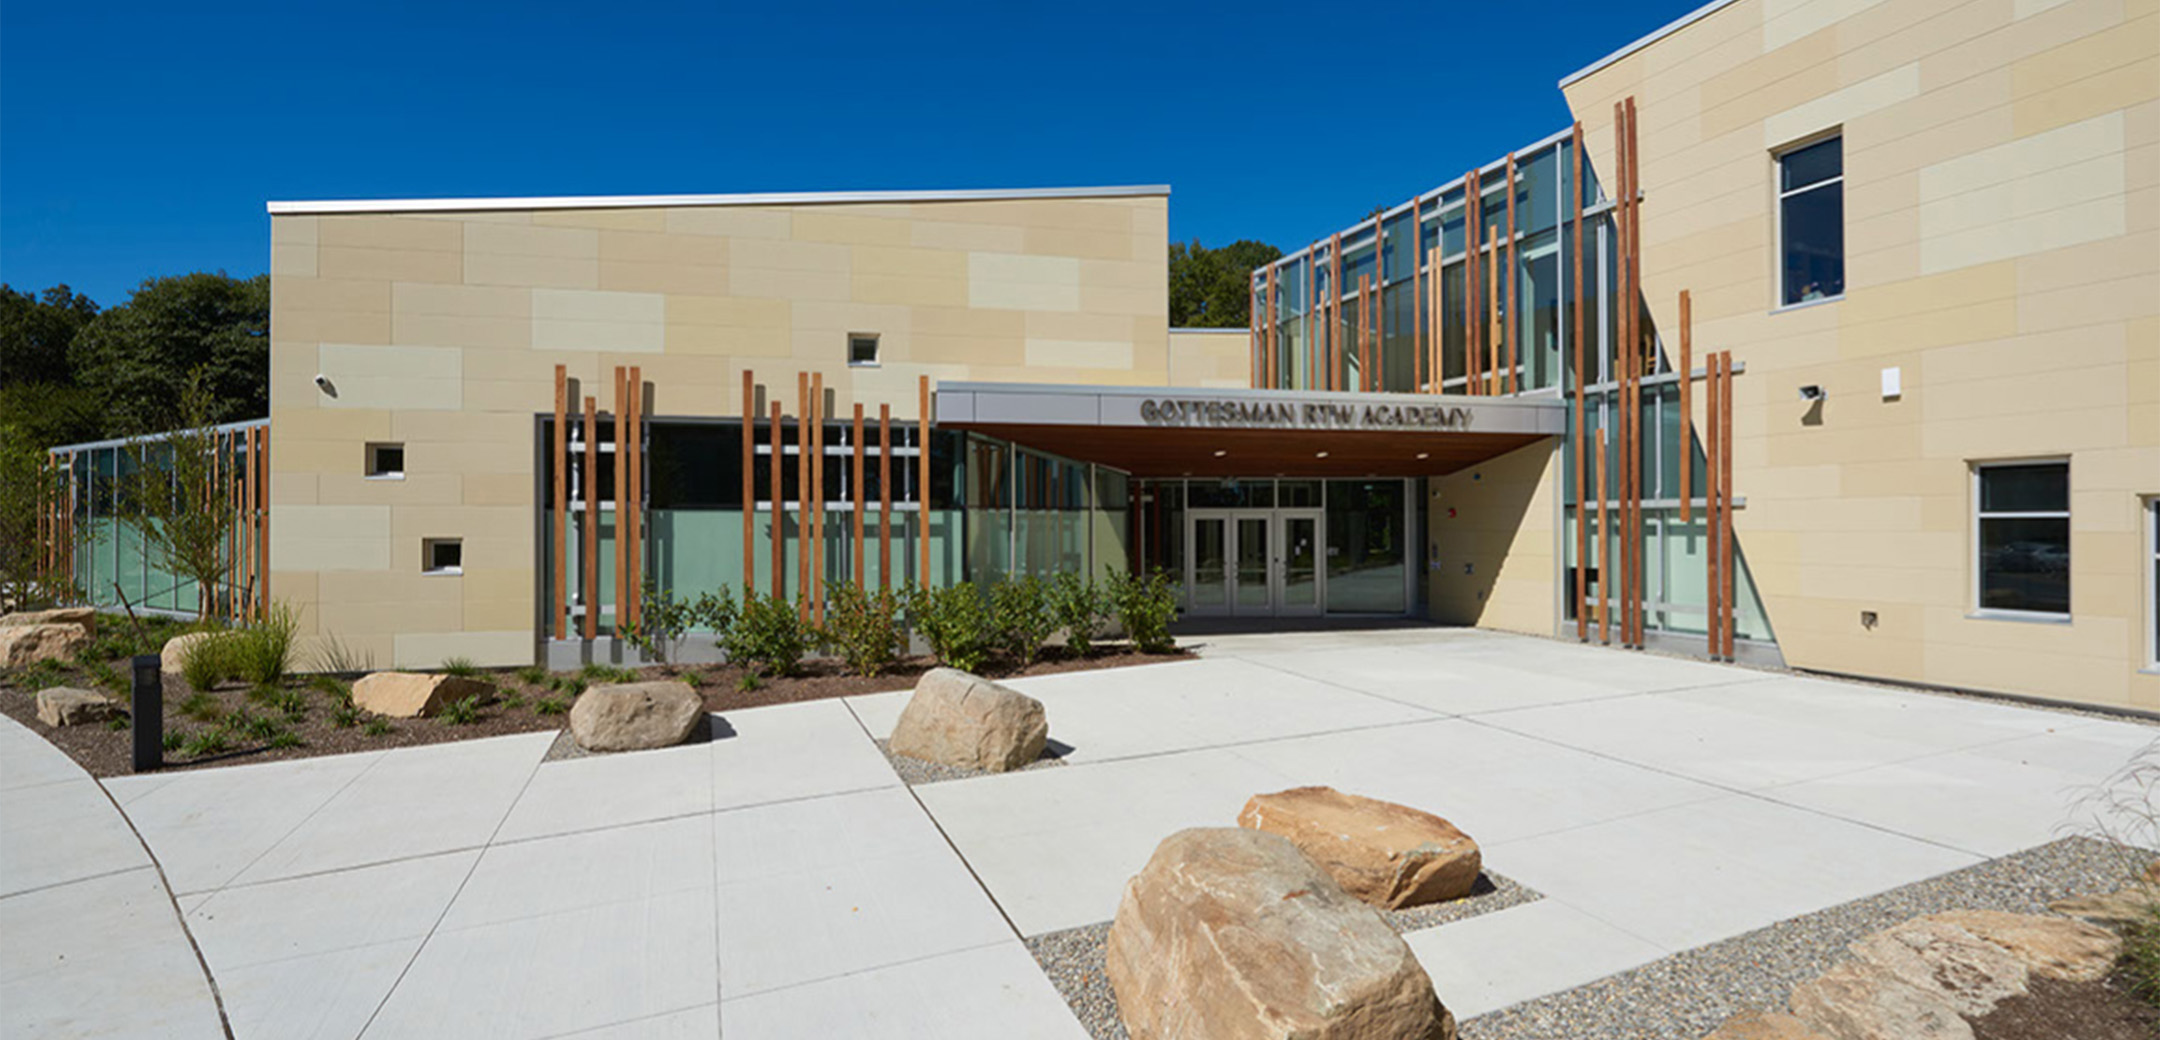 A close up view of the Gottesman RTW Academy building`s front entrance with stone décor and wood board glass accents.